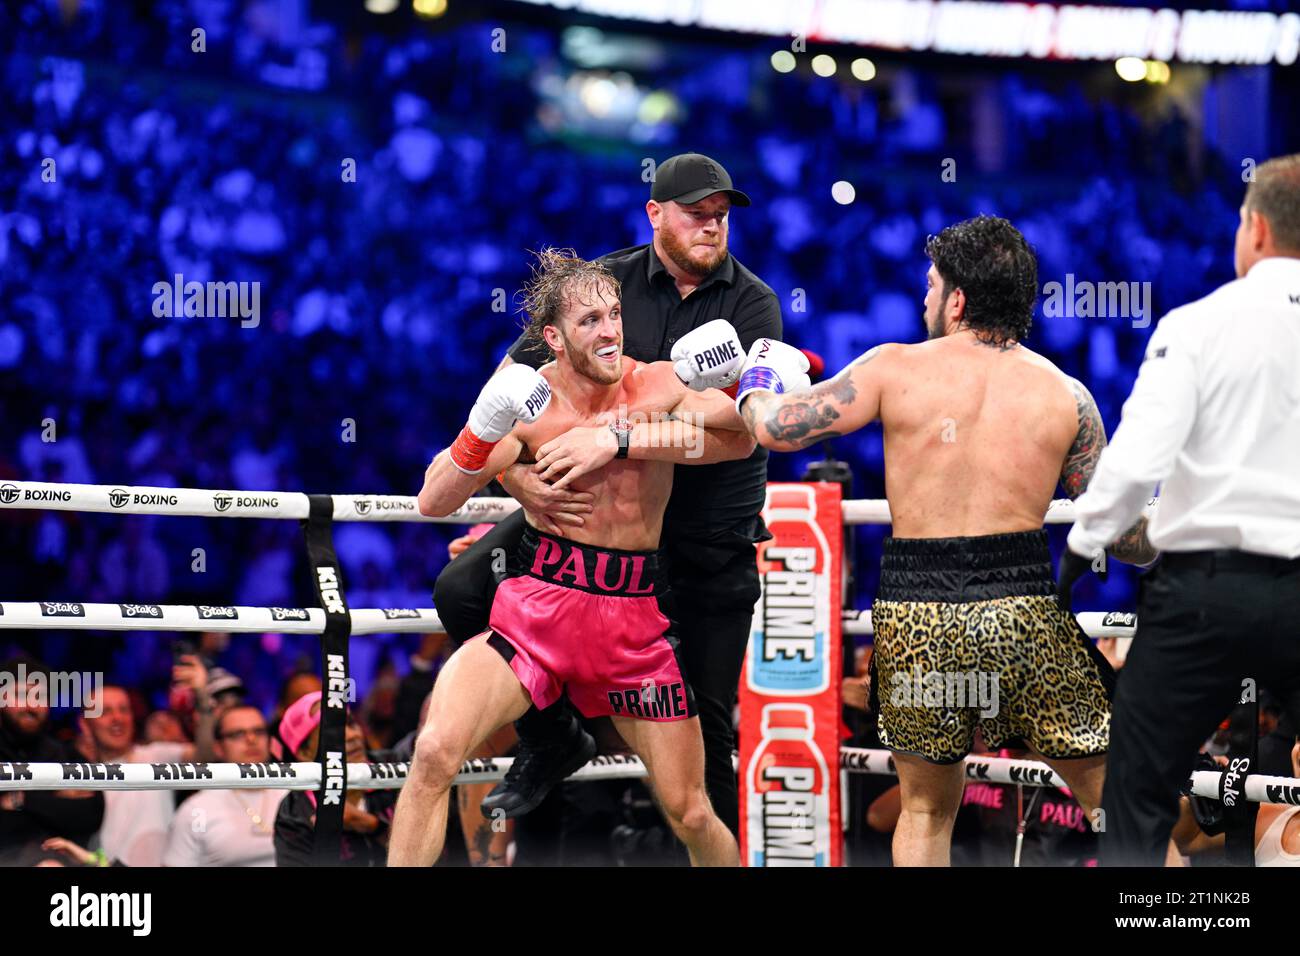 Manchester, UK. A mass brawl breaks out in the ring during Logan Paul and Dillon Danis' Prime Card boxing match at Manchester Arena. Paul won by disqualification follwing the brawl. Credit: Benjamin Wareing/ Alamy Live News Stock Photo